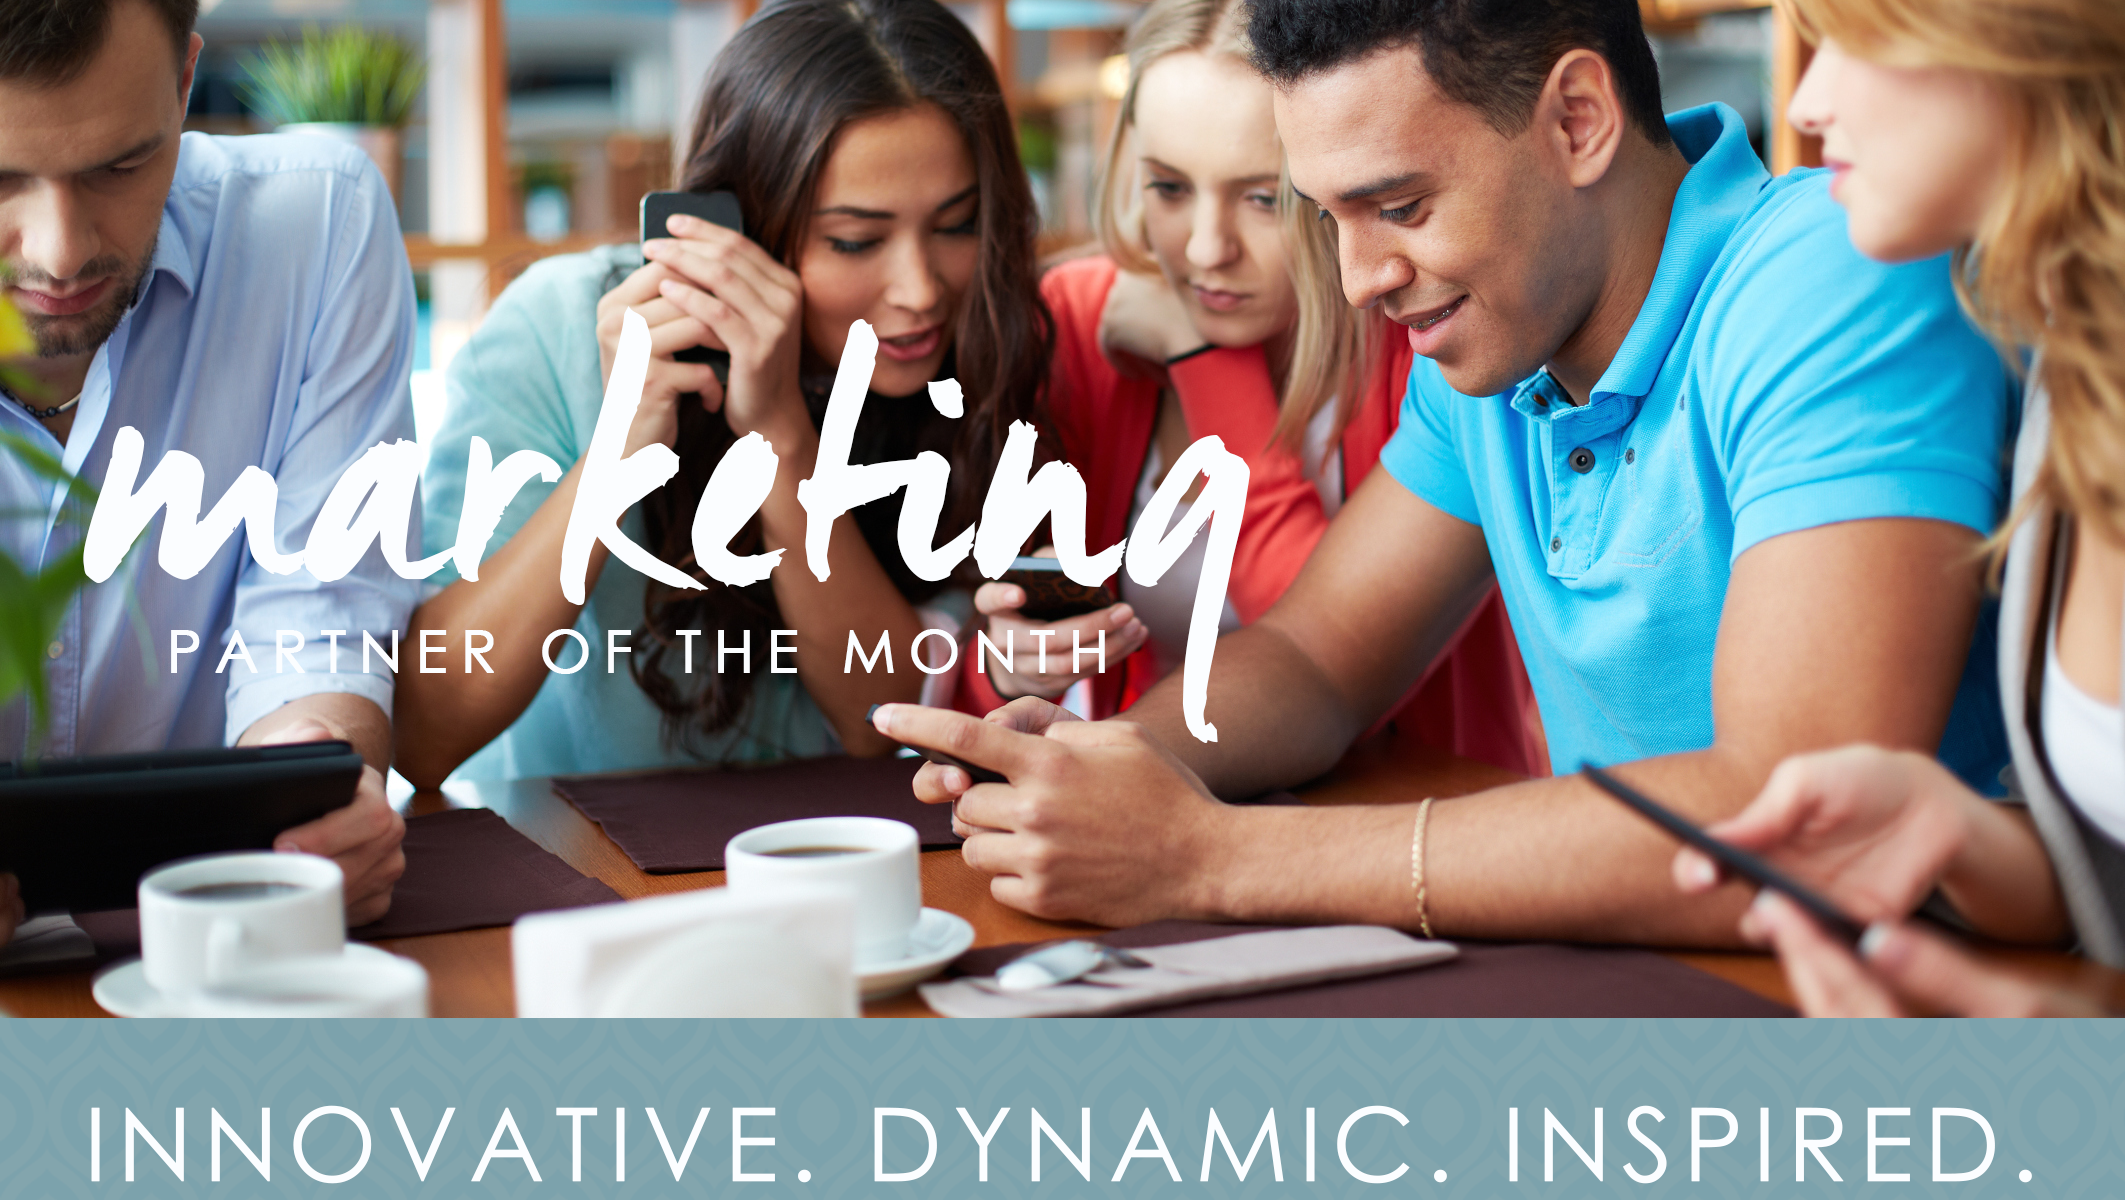 Congratulations to Contact At Once, LPC's Marketing Partner of the Month!